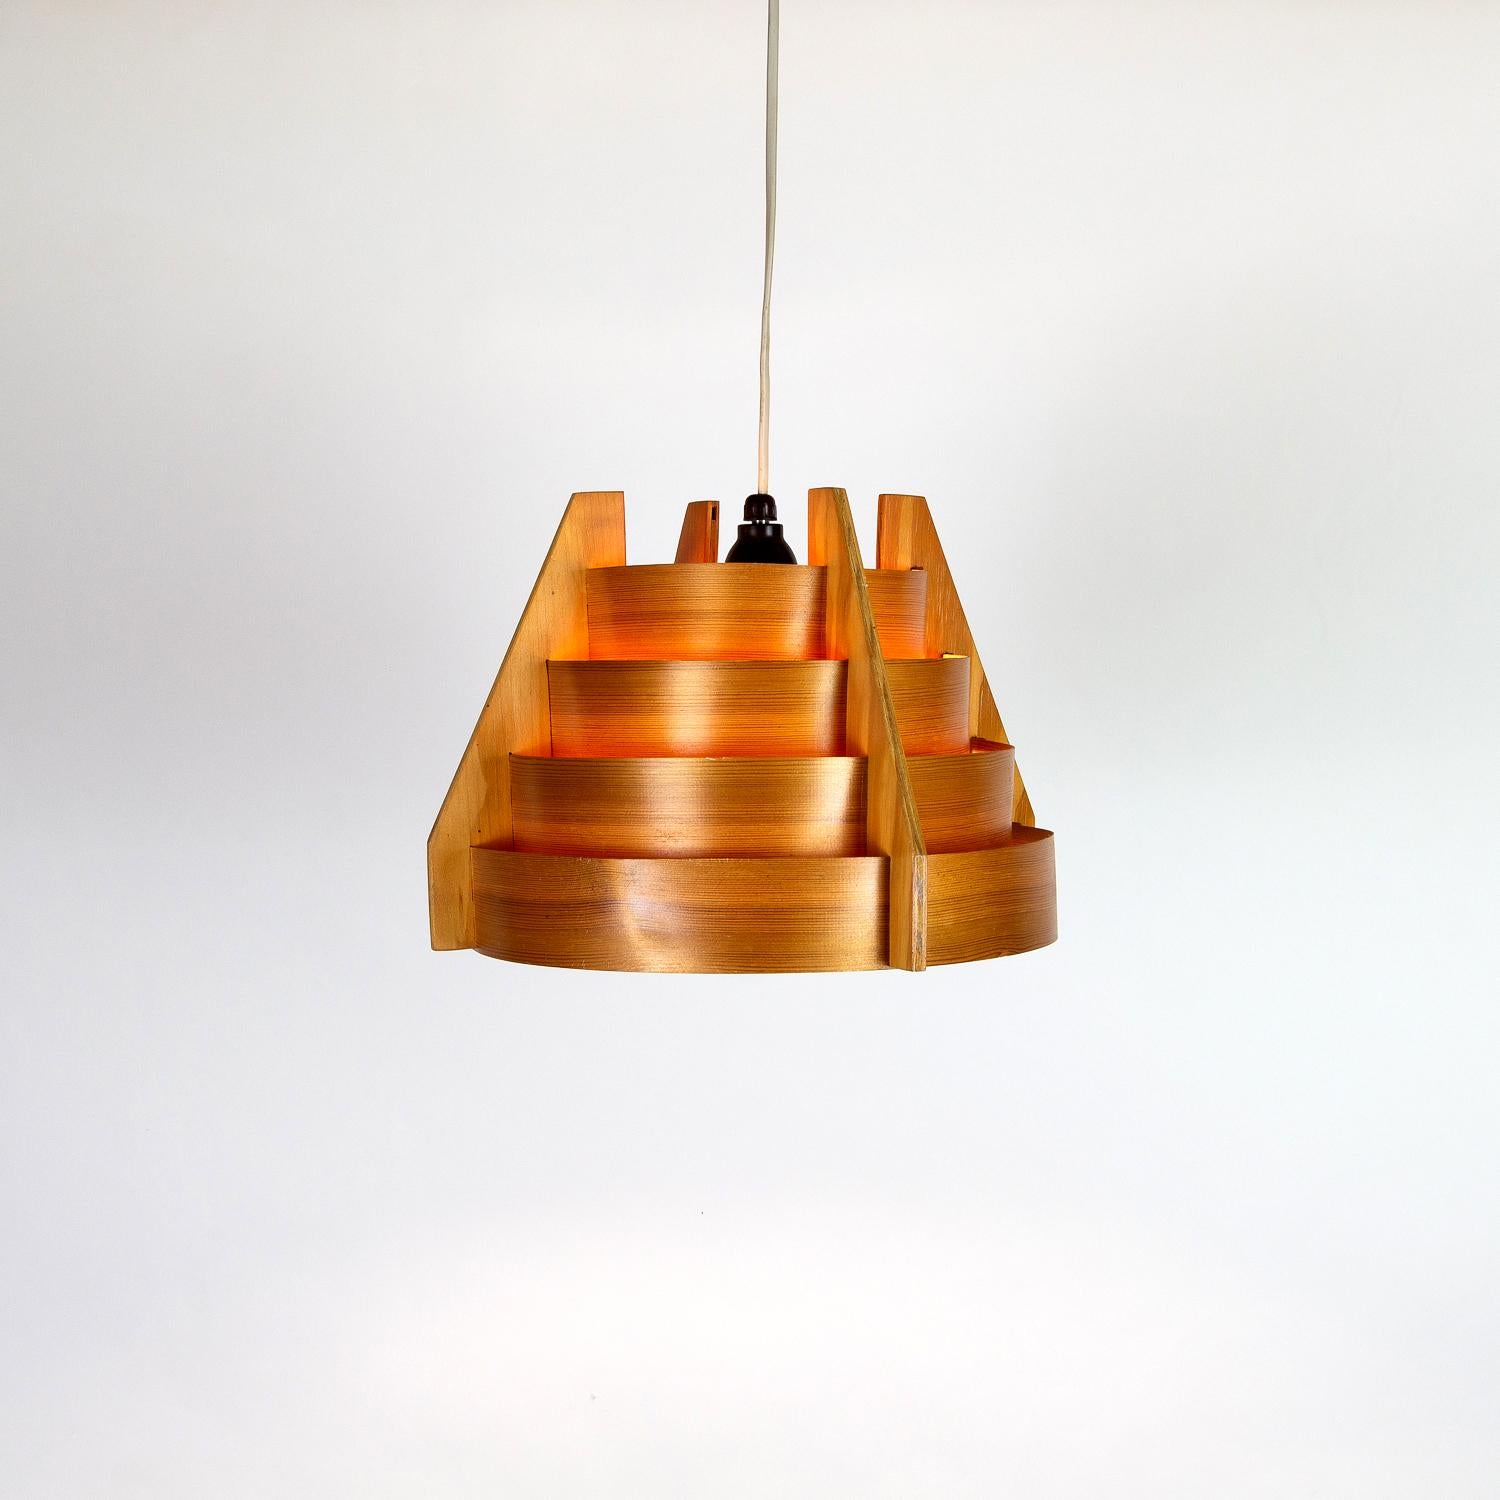 A midcentury wooden pendant light by Hans Agne Jakobsson for AB Markaryd, Sweden, 1960s. This design is a Scandinavian Classic, made from concentric pine circles creating warm, atmospheric light and hiding glare from the bulb.

   